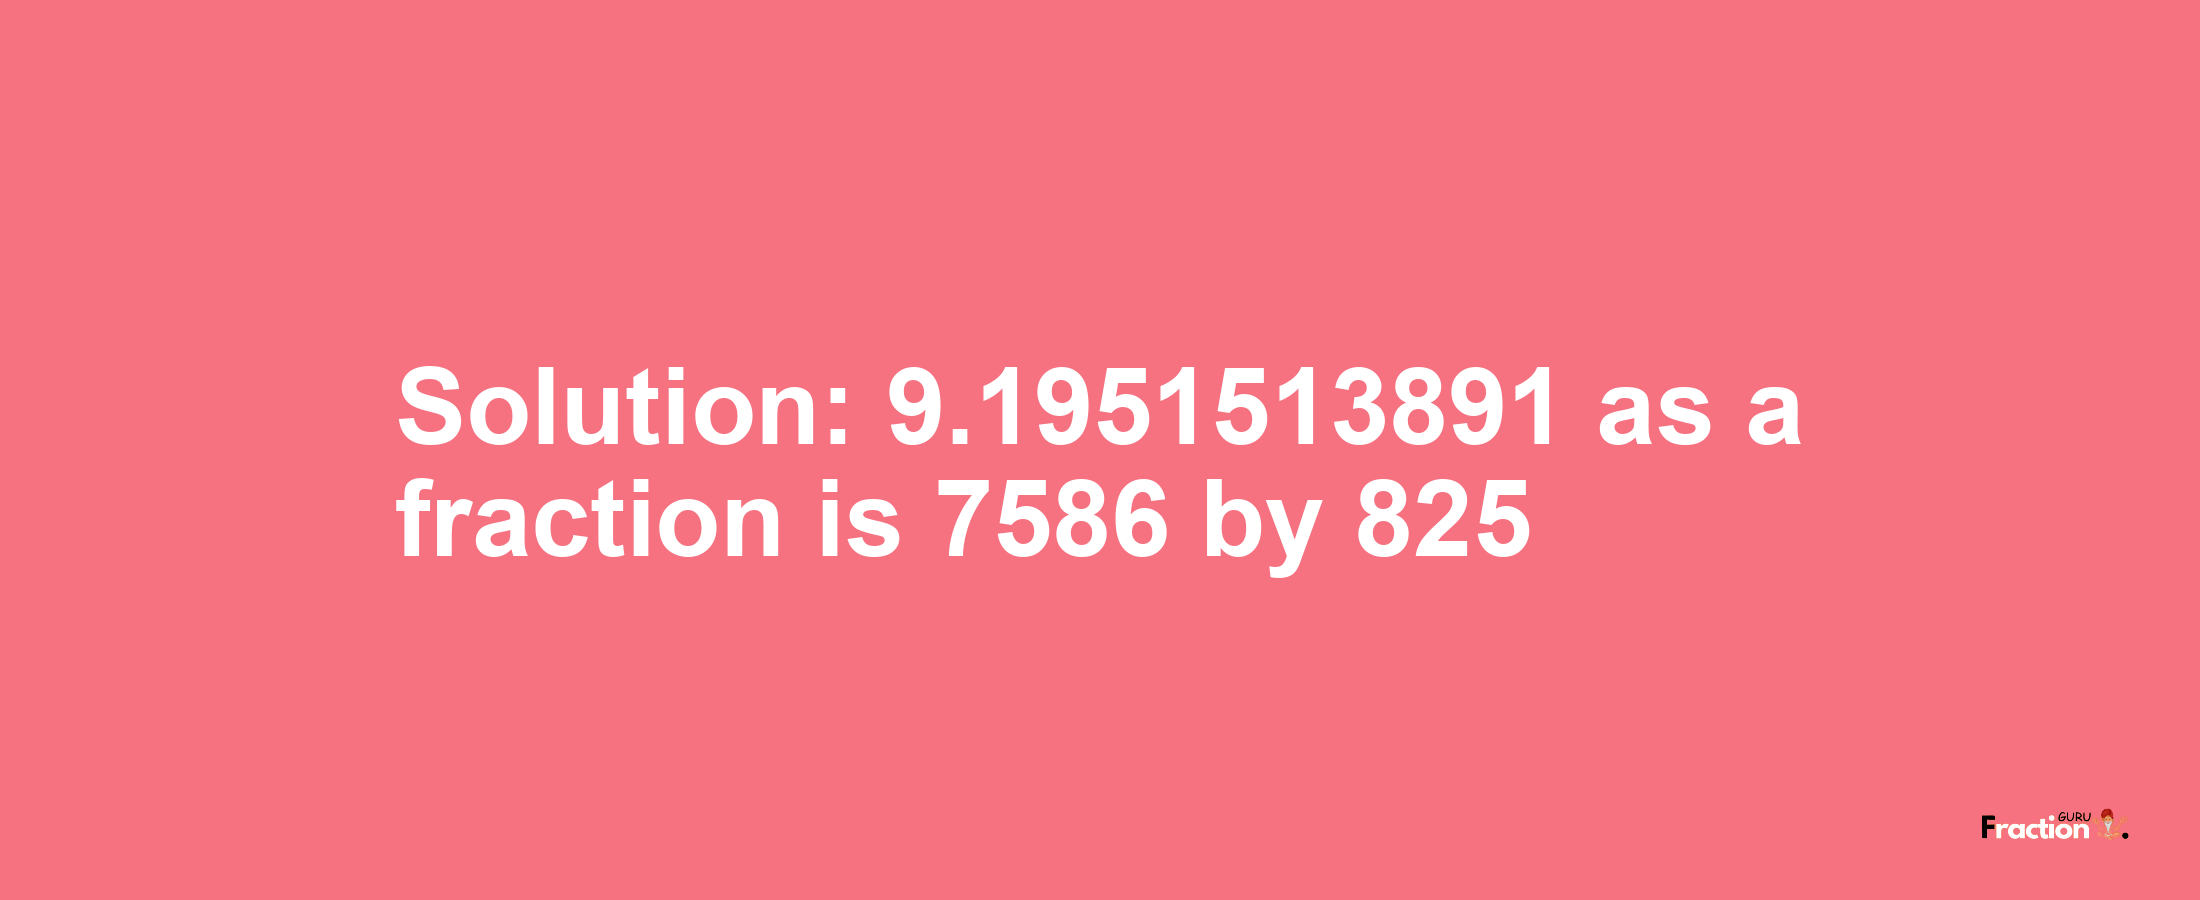 Solution:9.1951513891 as a fraction is 7586/825